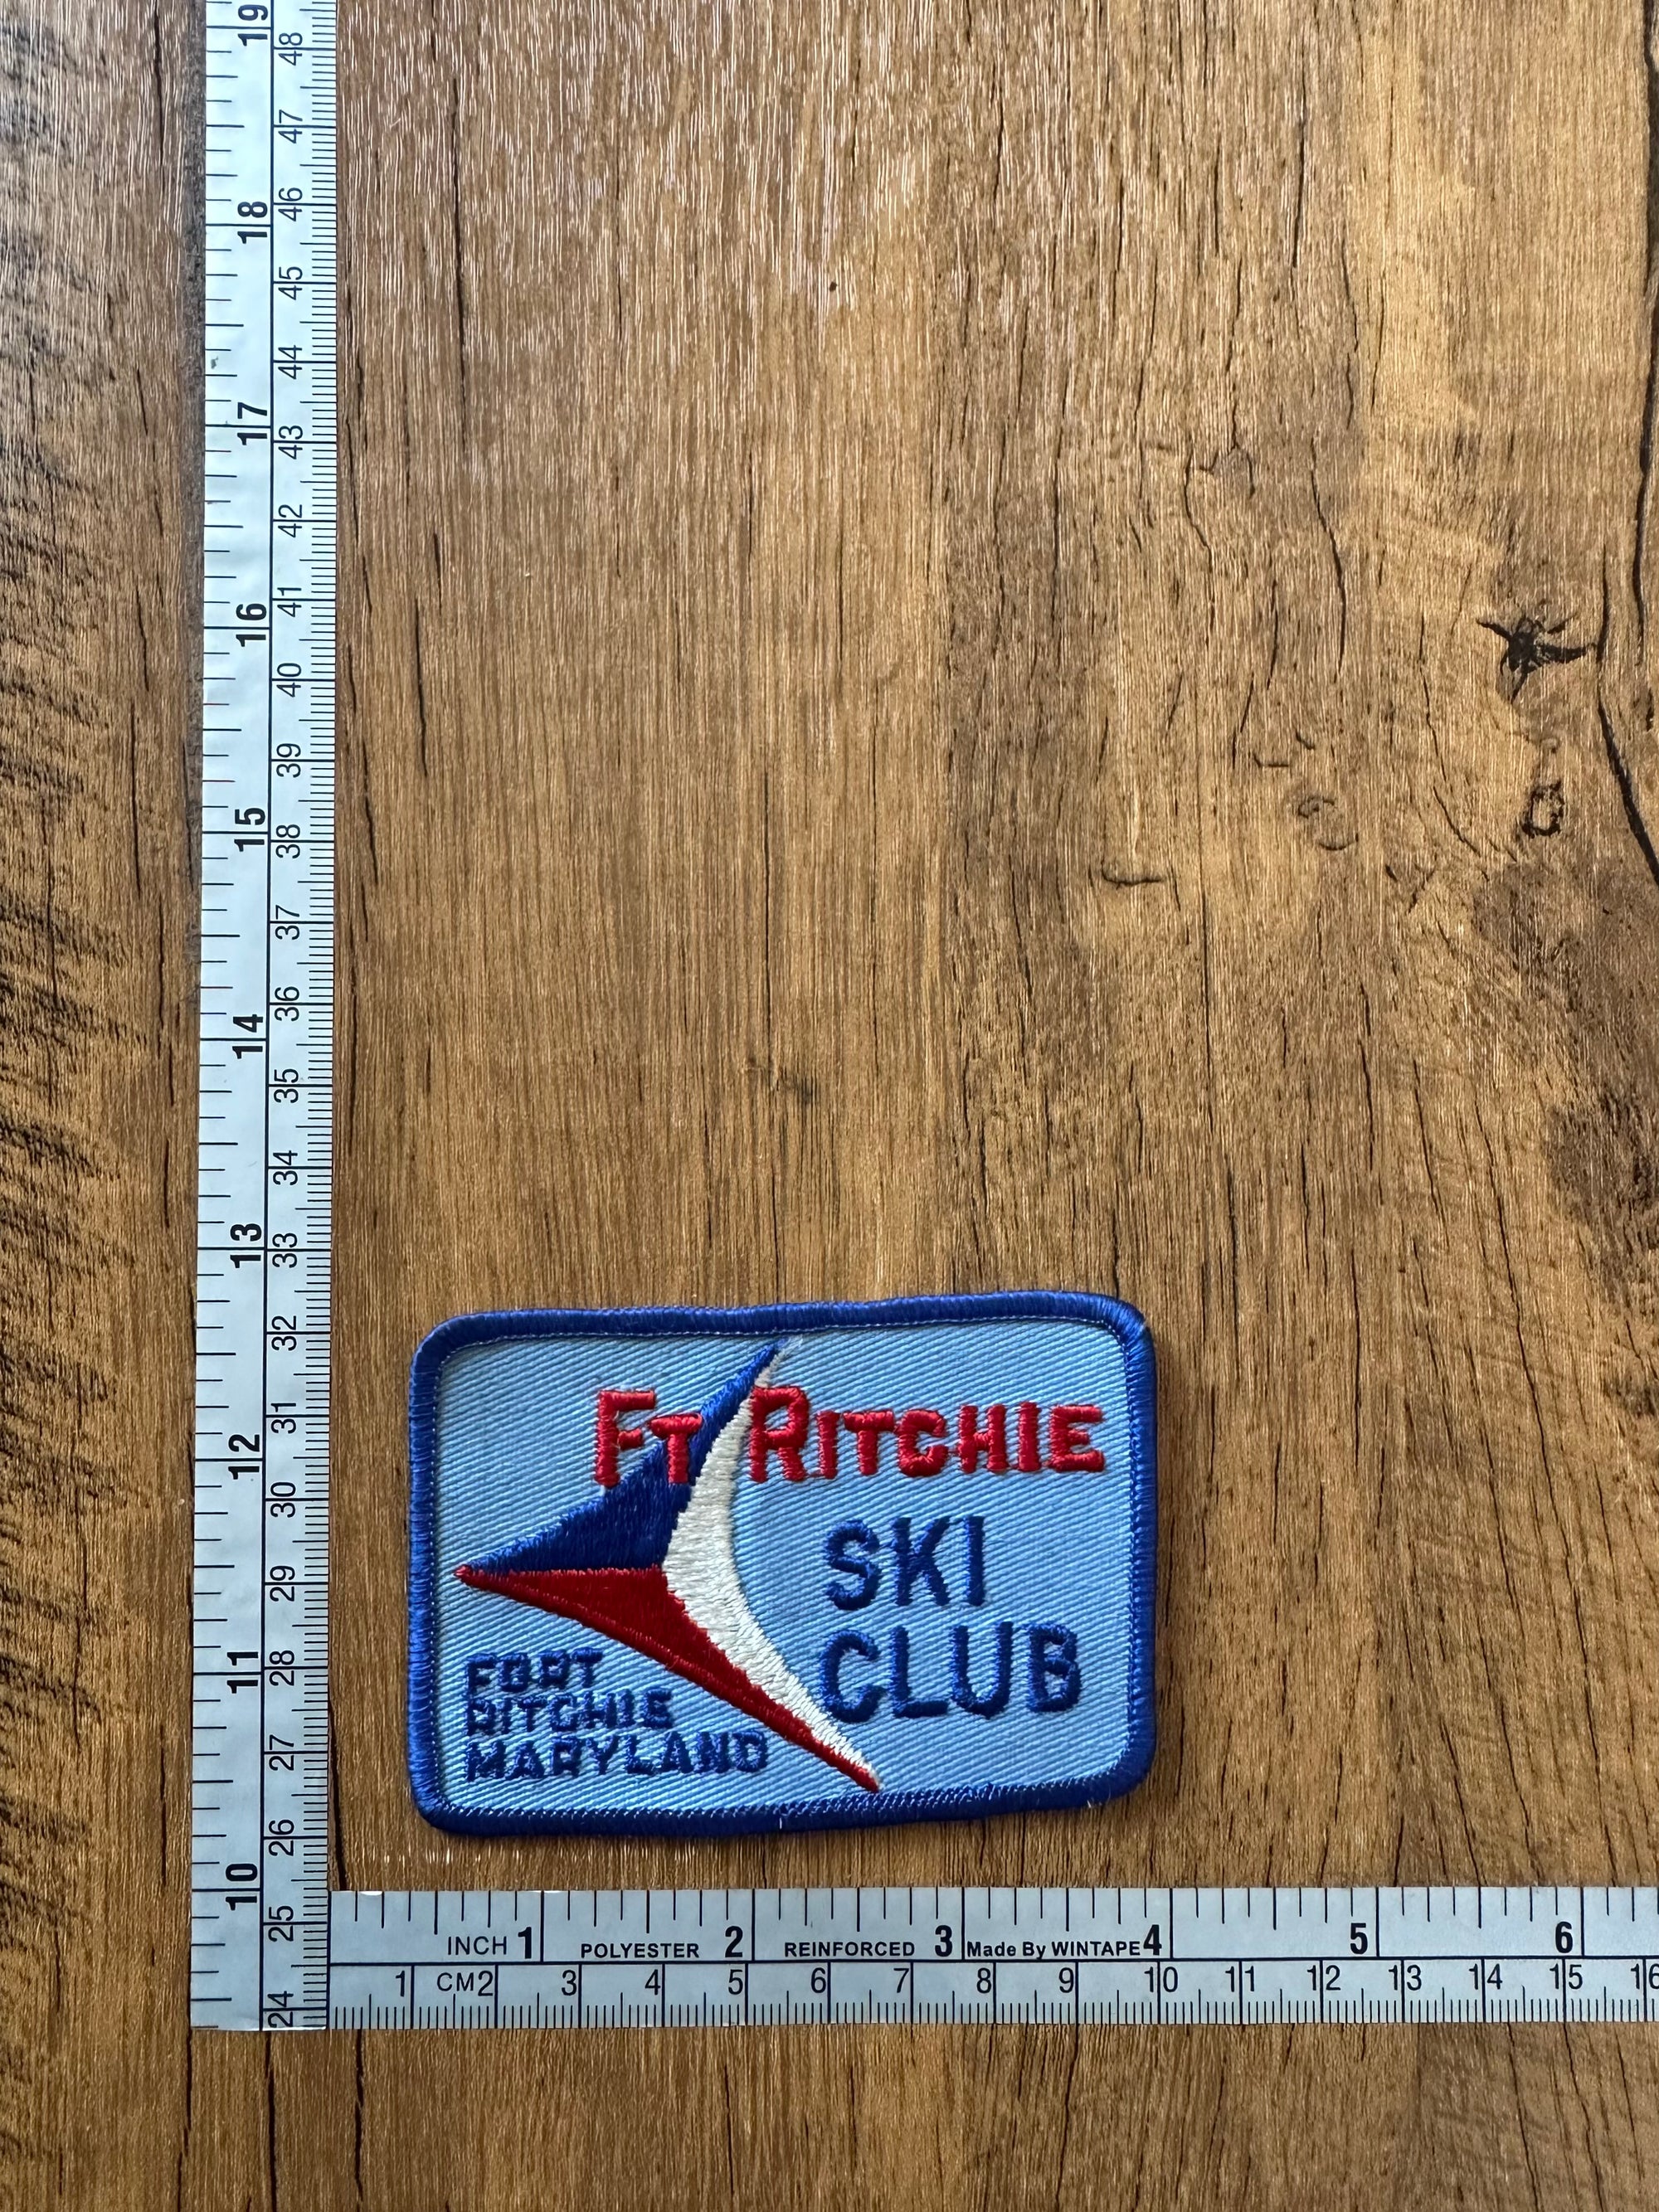 Vintage FT Ritchie Ski Club- Fort Ritchie Maryland